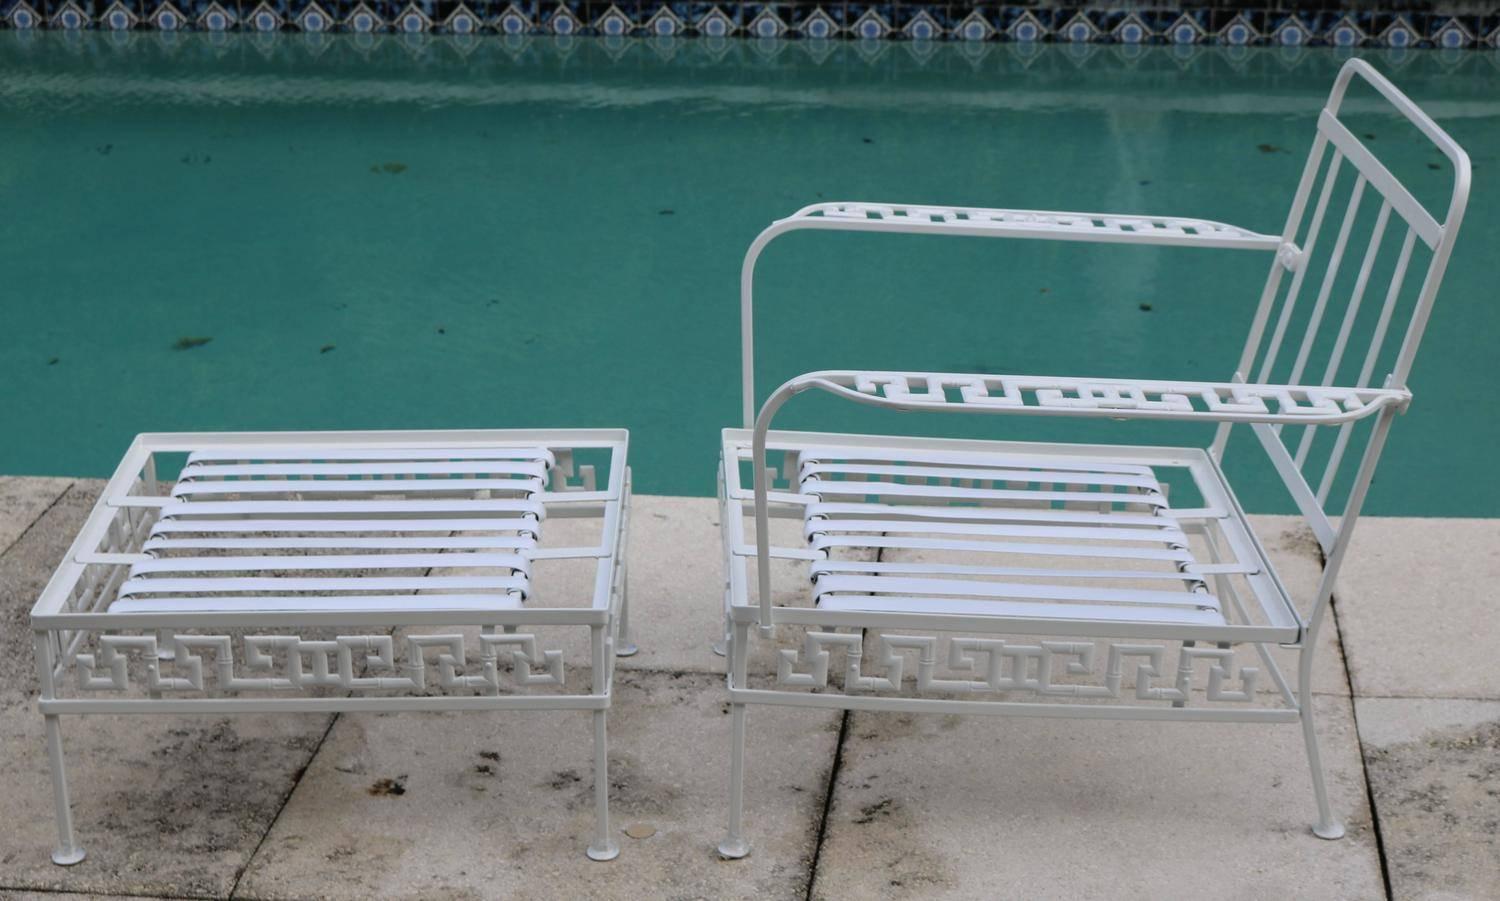 Mid-Century Modern Hollywood Regency Salterini aluminum in classical Greek key design lounge chair and ottoman.
Deep comfy seat and back cushions in light green poly suede-in restored condition. The frame is newly powder-coated white and the frame